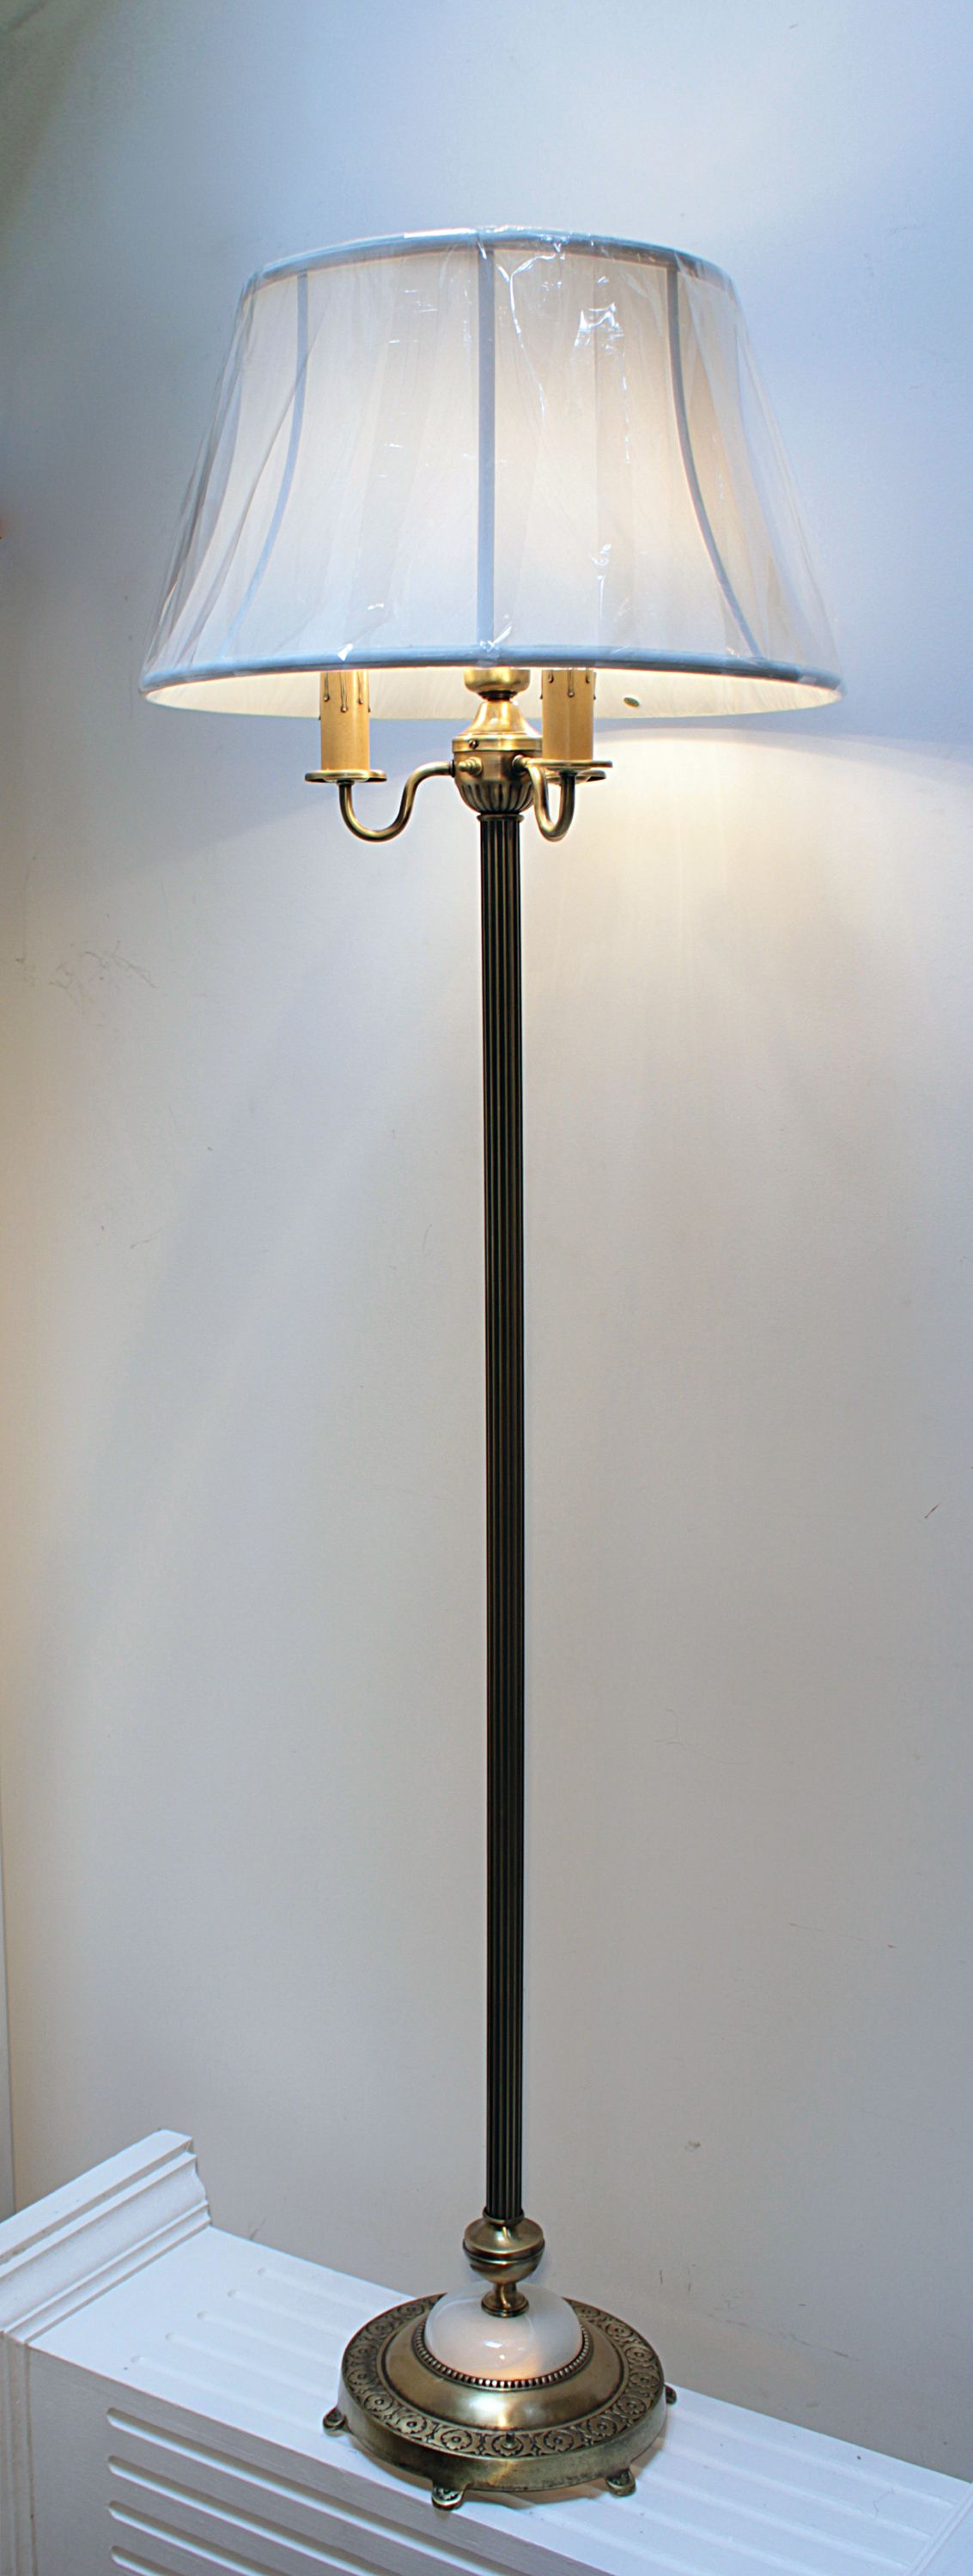 Mogul Base Floor Lamp Google Search Let There Be Light intended for dimensions 1133 X 3000